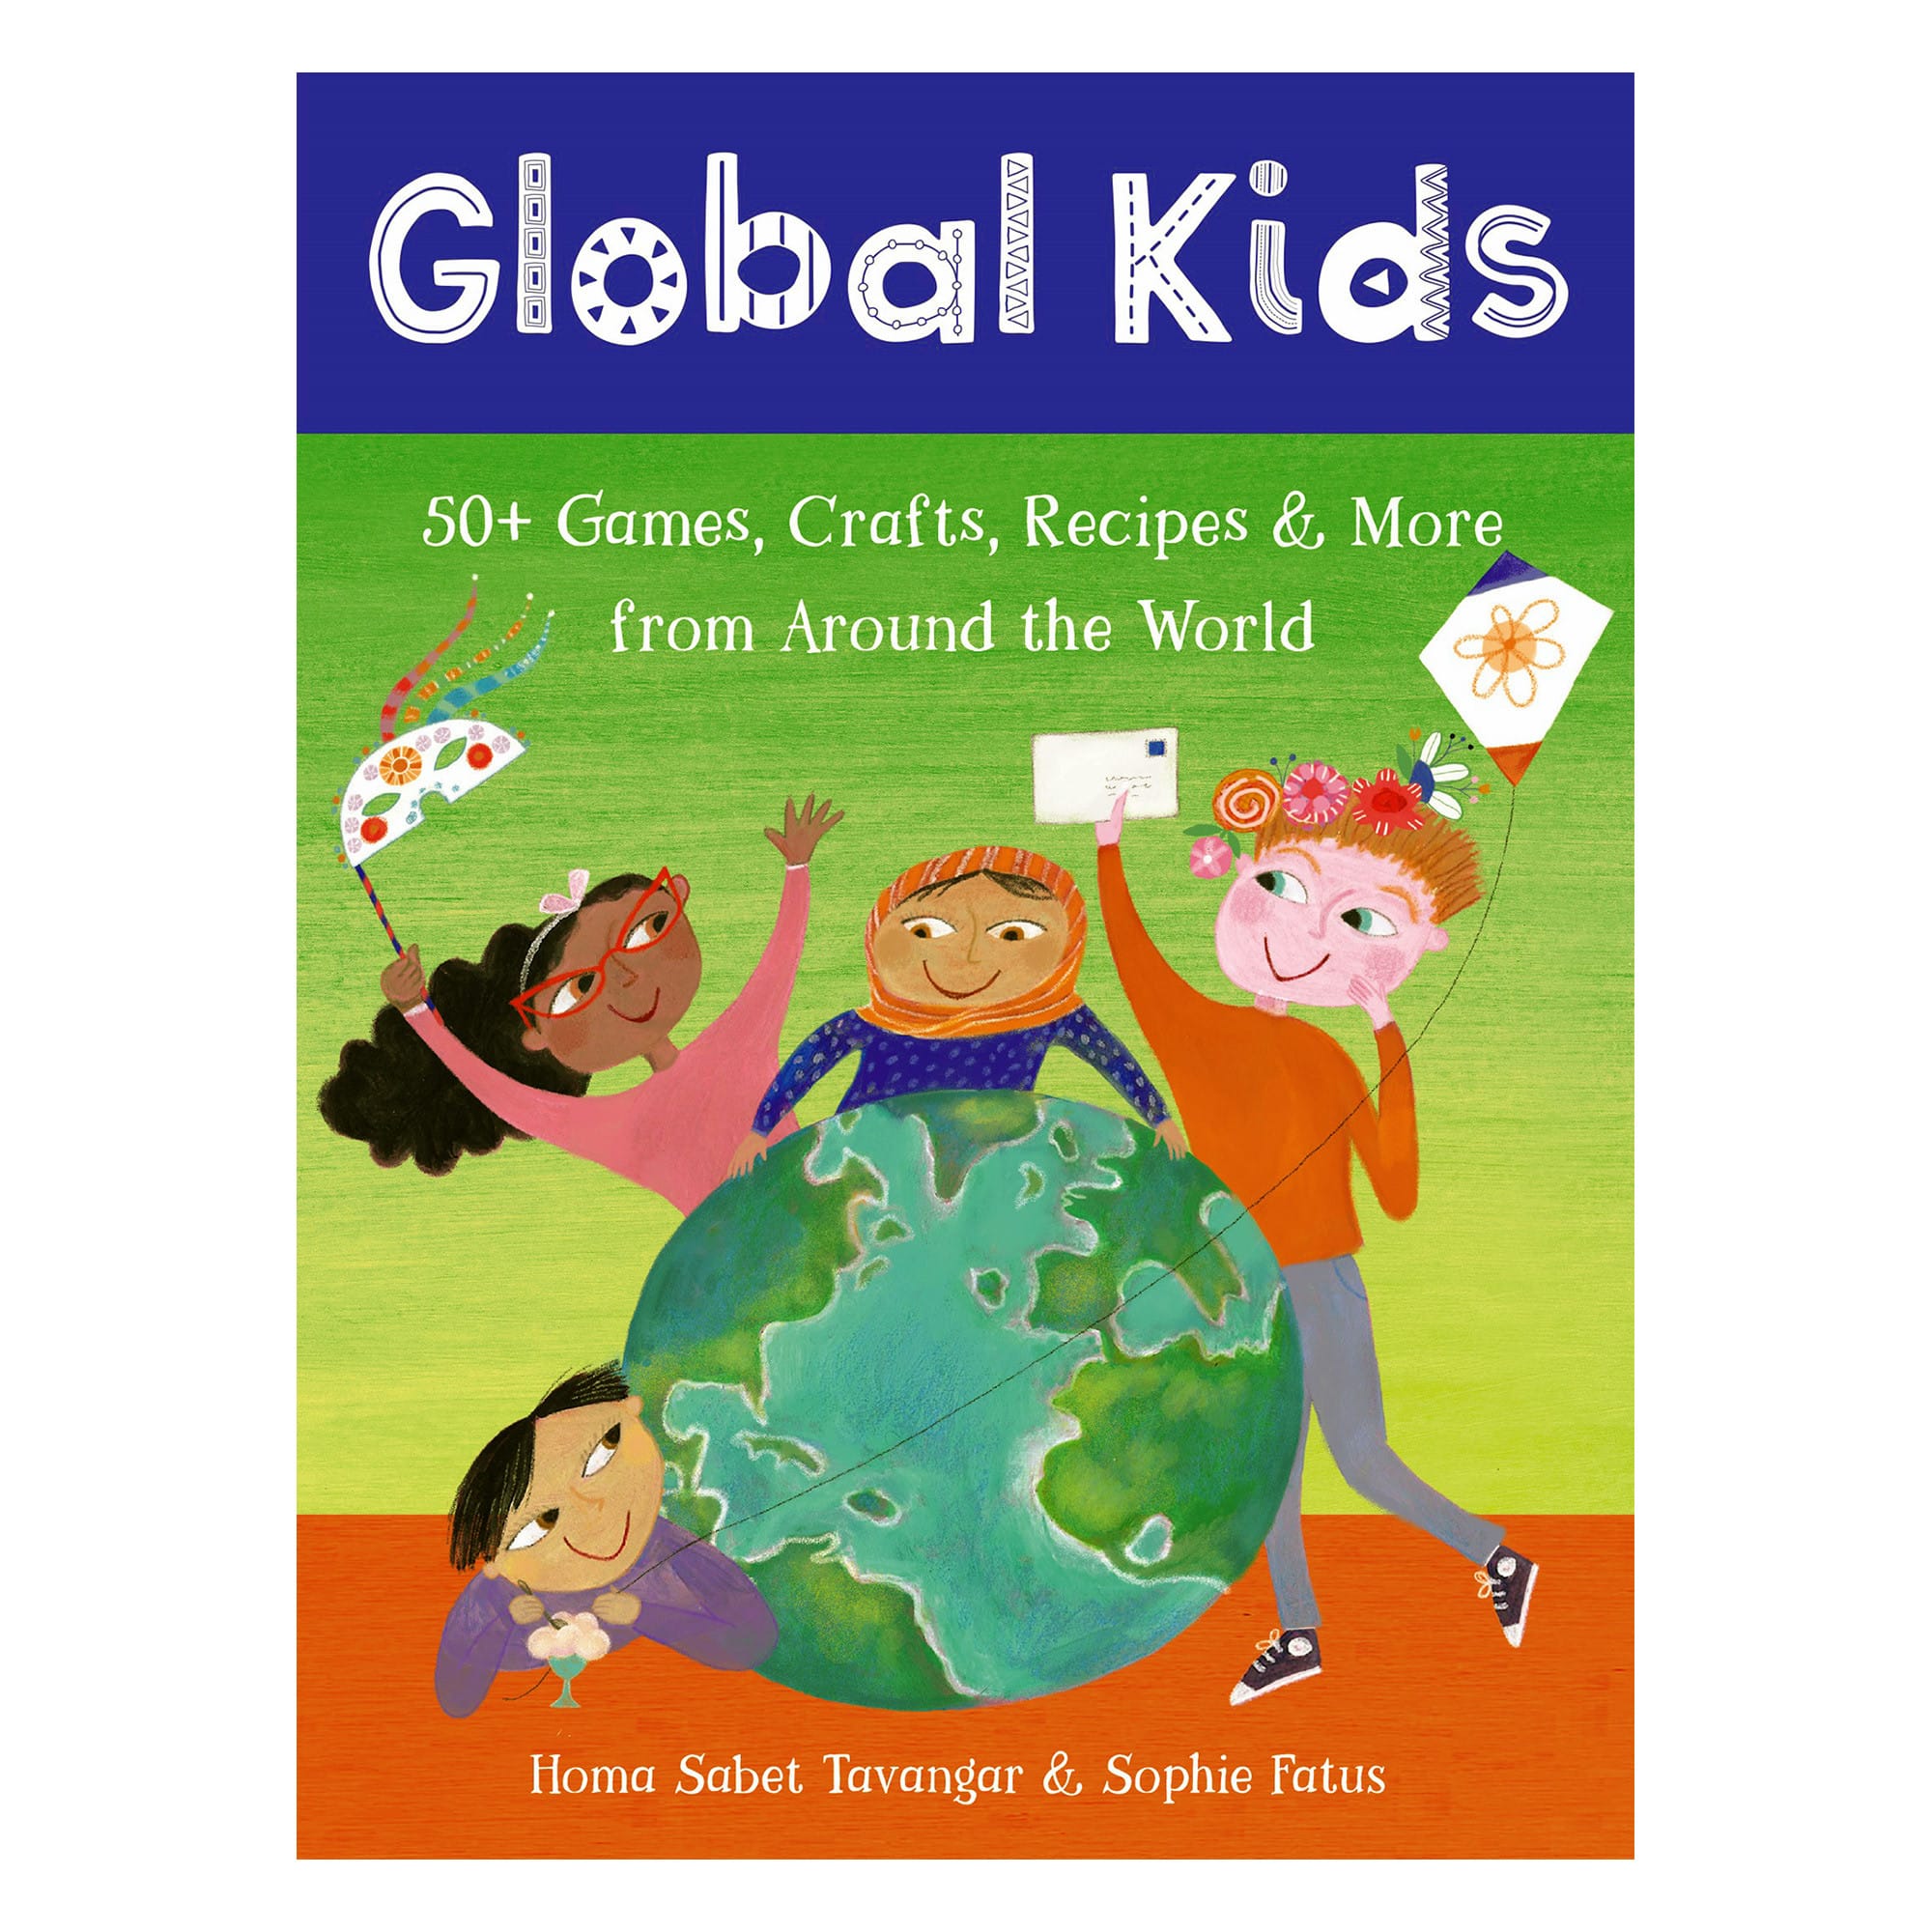 Global Kids - 50+ Games, Crafts, Recipes & More from Around the World